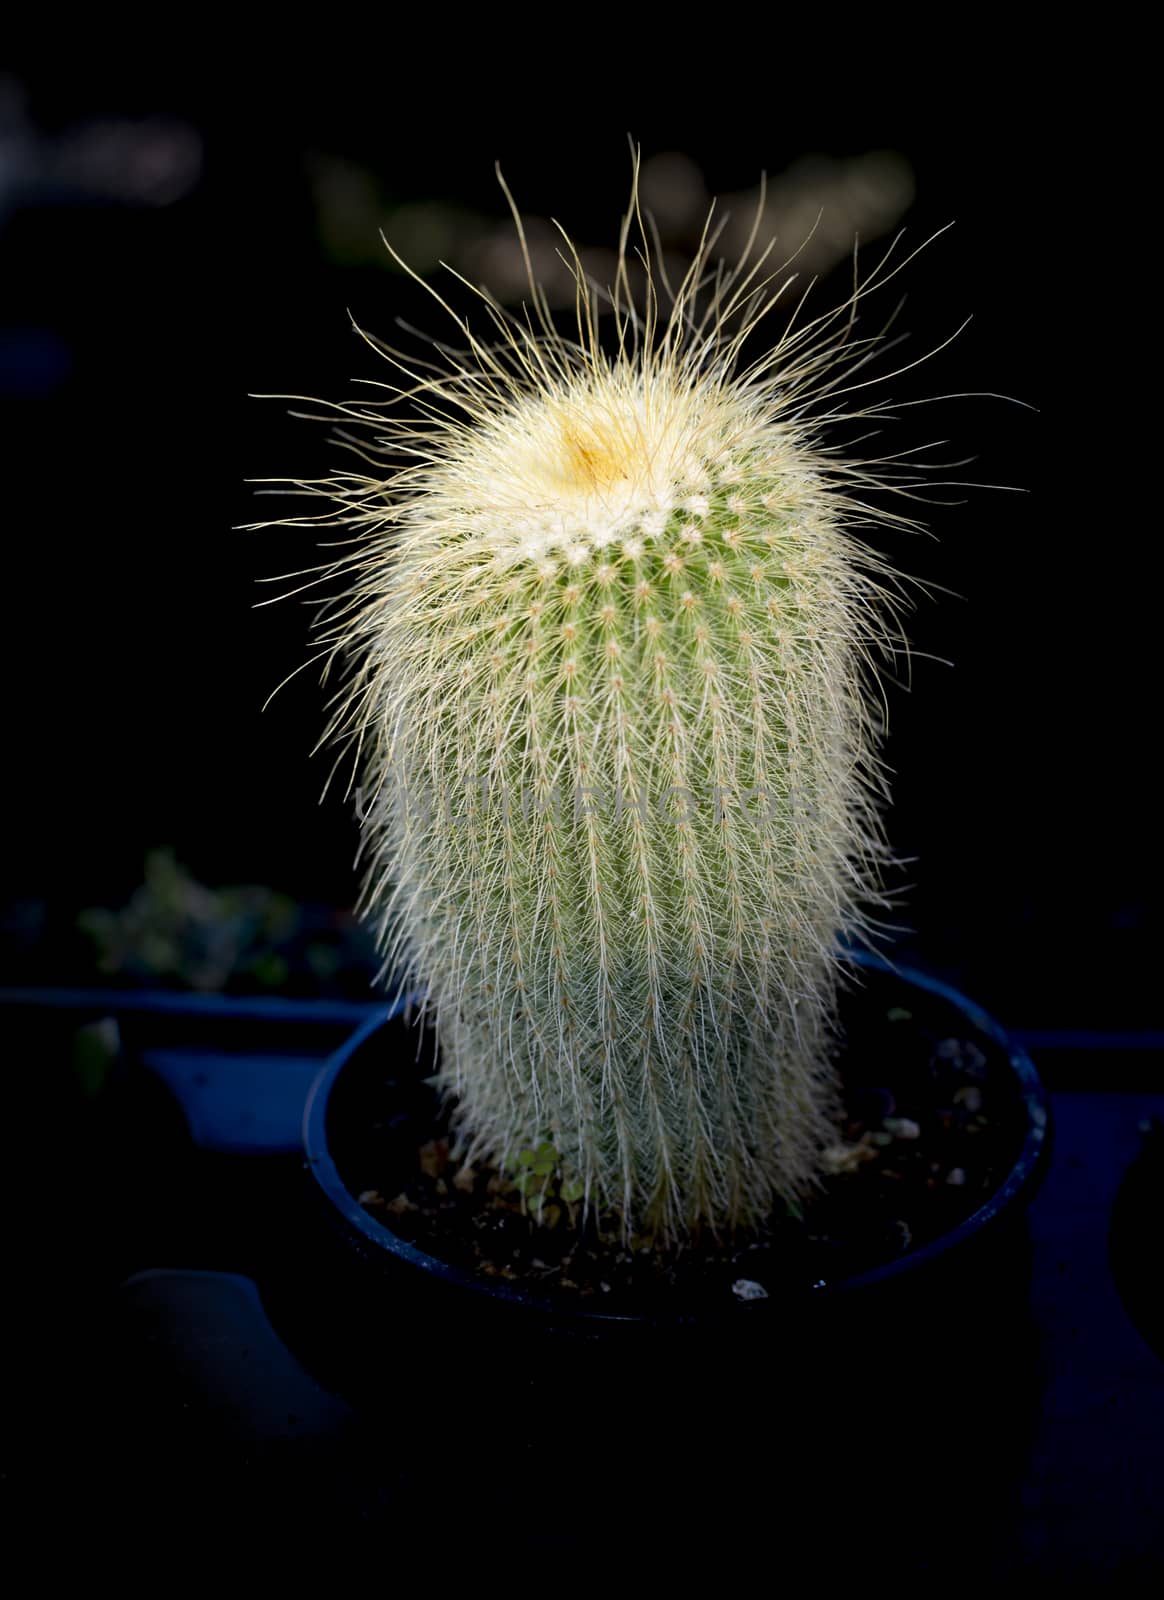 Cactus in light by ArtesiaWells